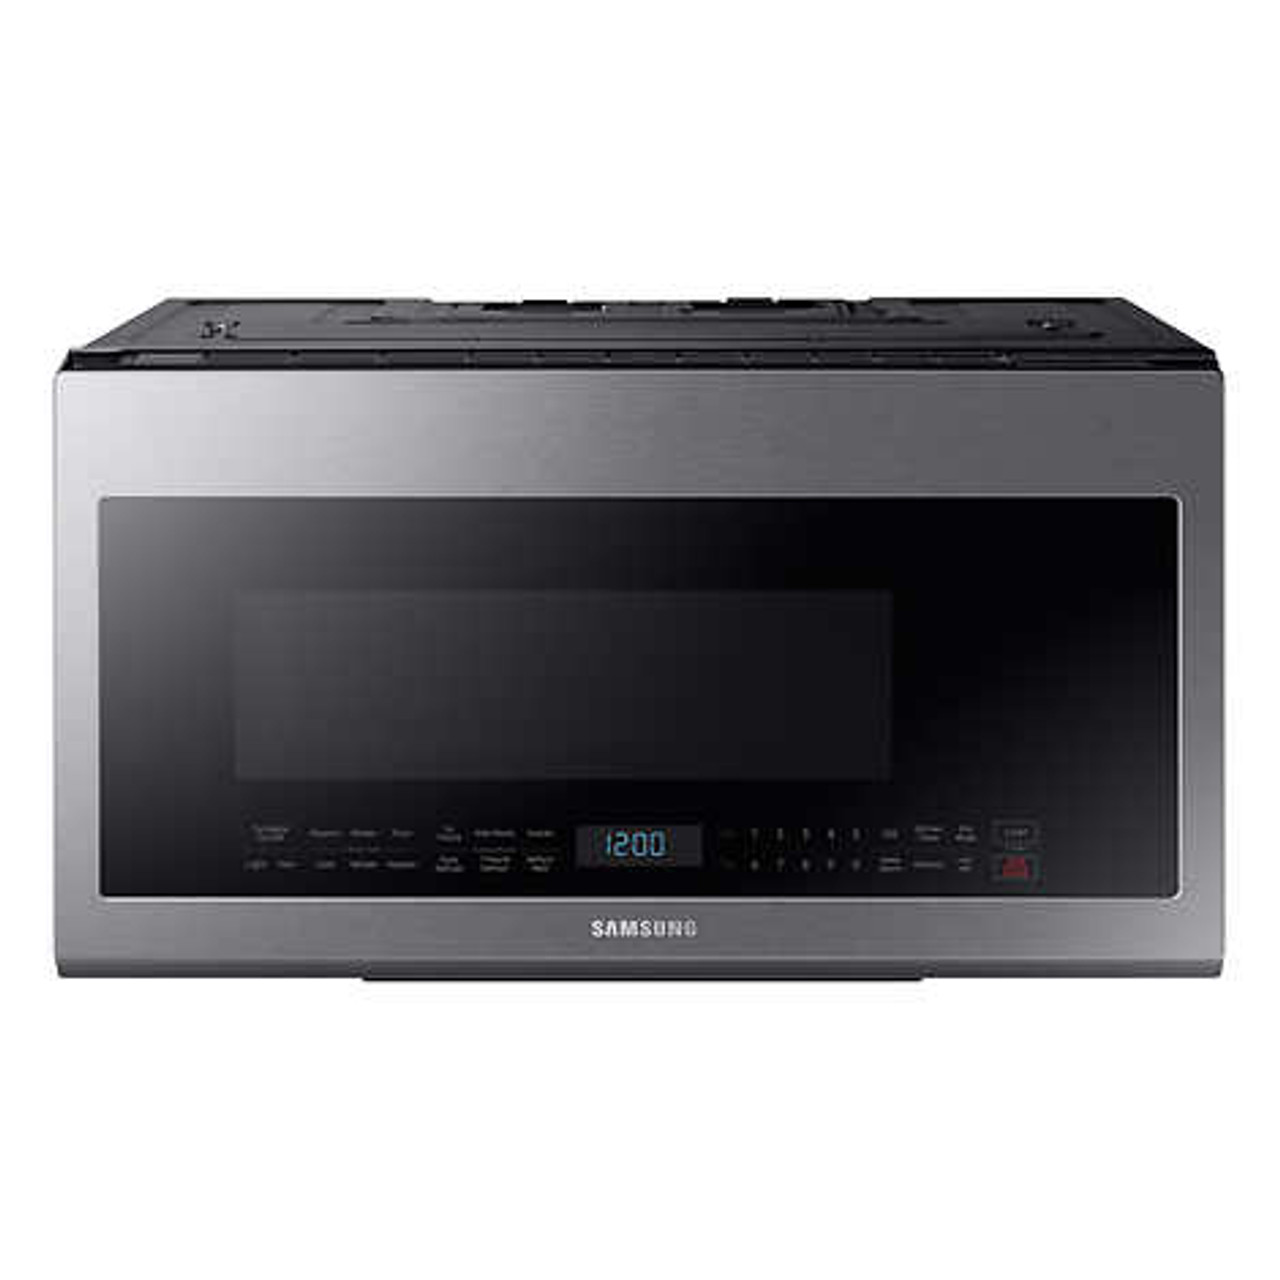 Samsung 2.1 cu. ft. Stainless Steel Over the Range Microwave - Powerful and Stylish Kitchen Upgrade
- Chicken Pieces